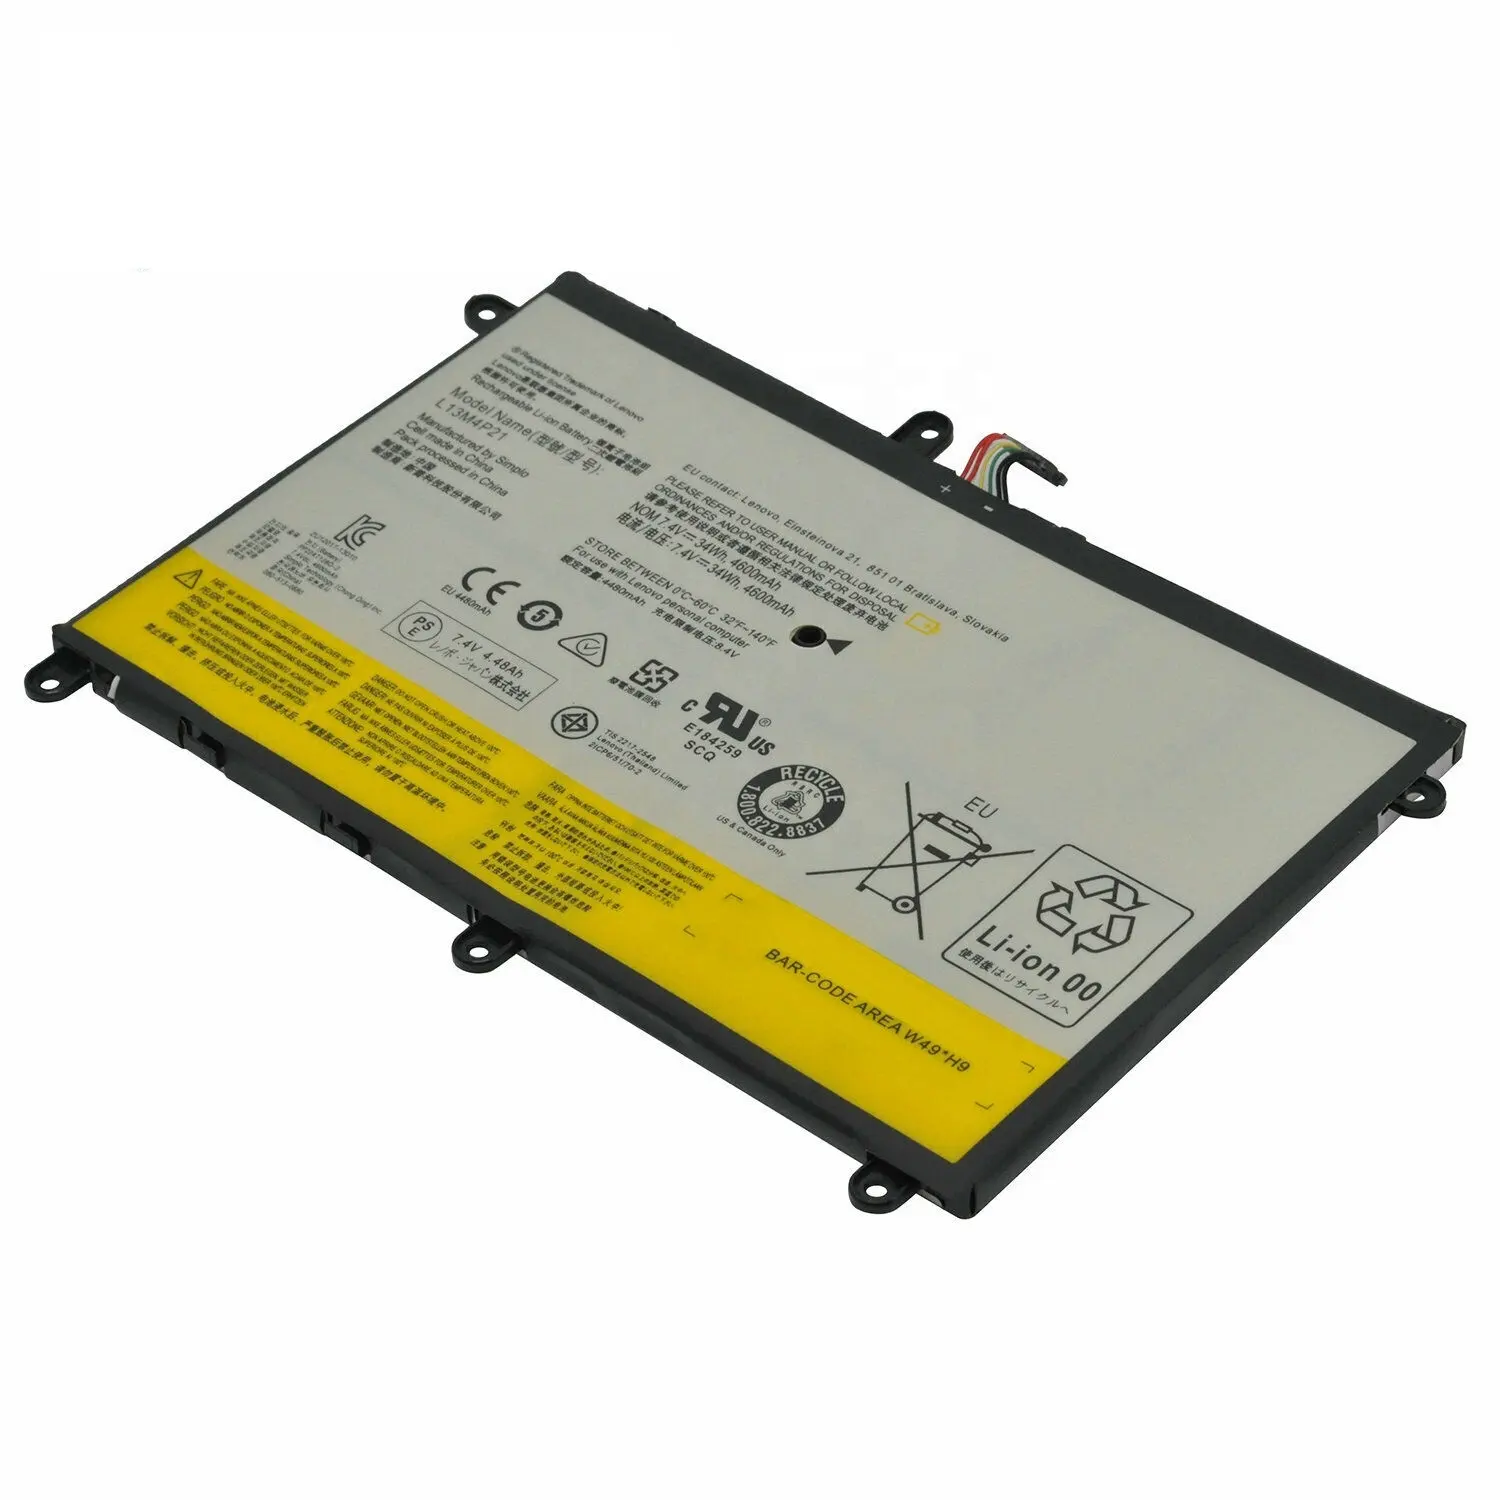 Battery Replacement X200 X201 Tablet Series 43R9257 43R9256 42T4564 Laptop X200T X201T for IBM ThinkPad